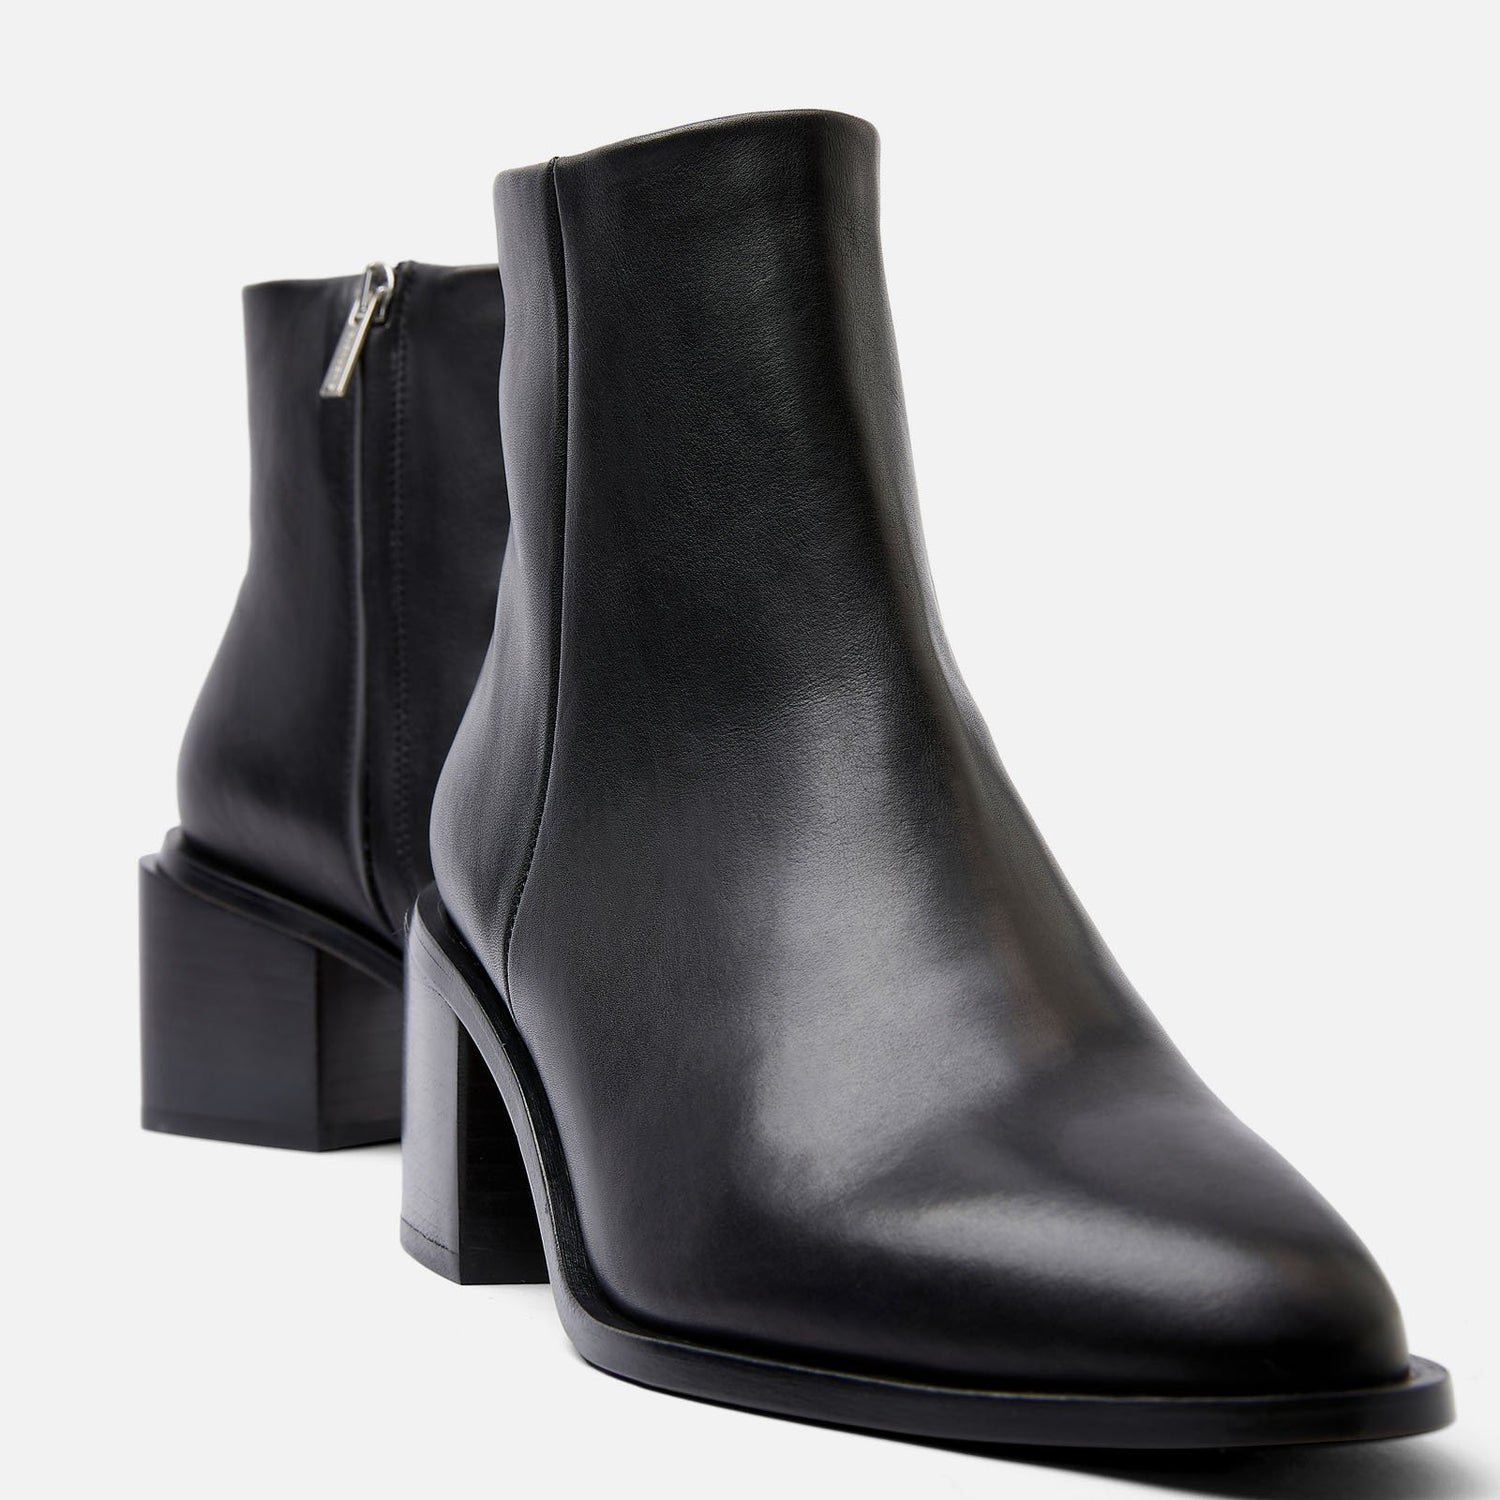 clergerie - XENIA ANKLE BOOTS, BLACK